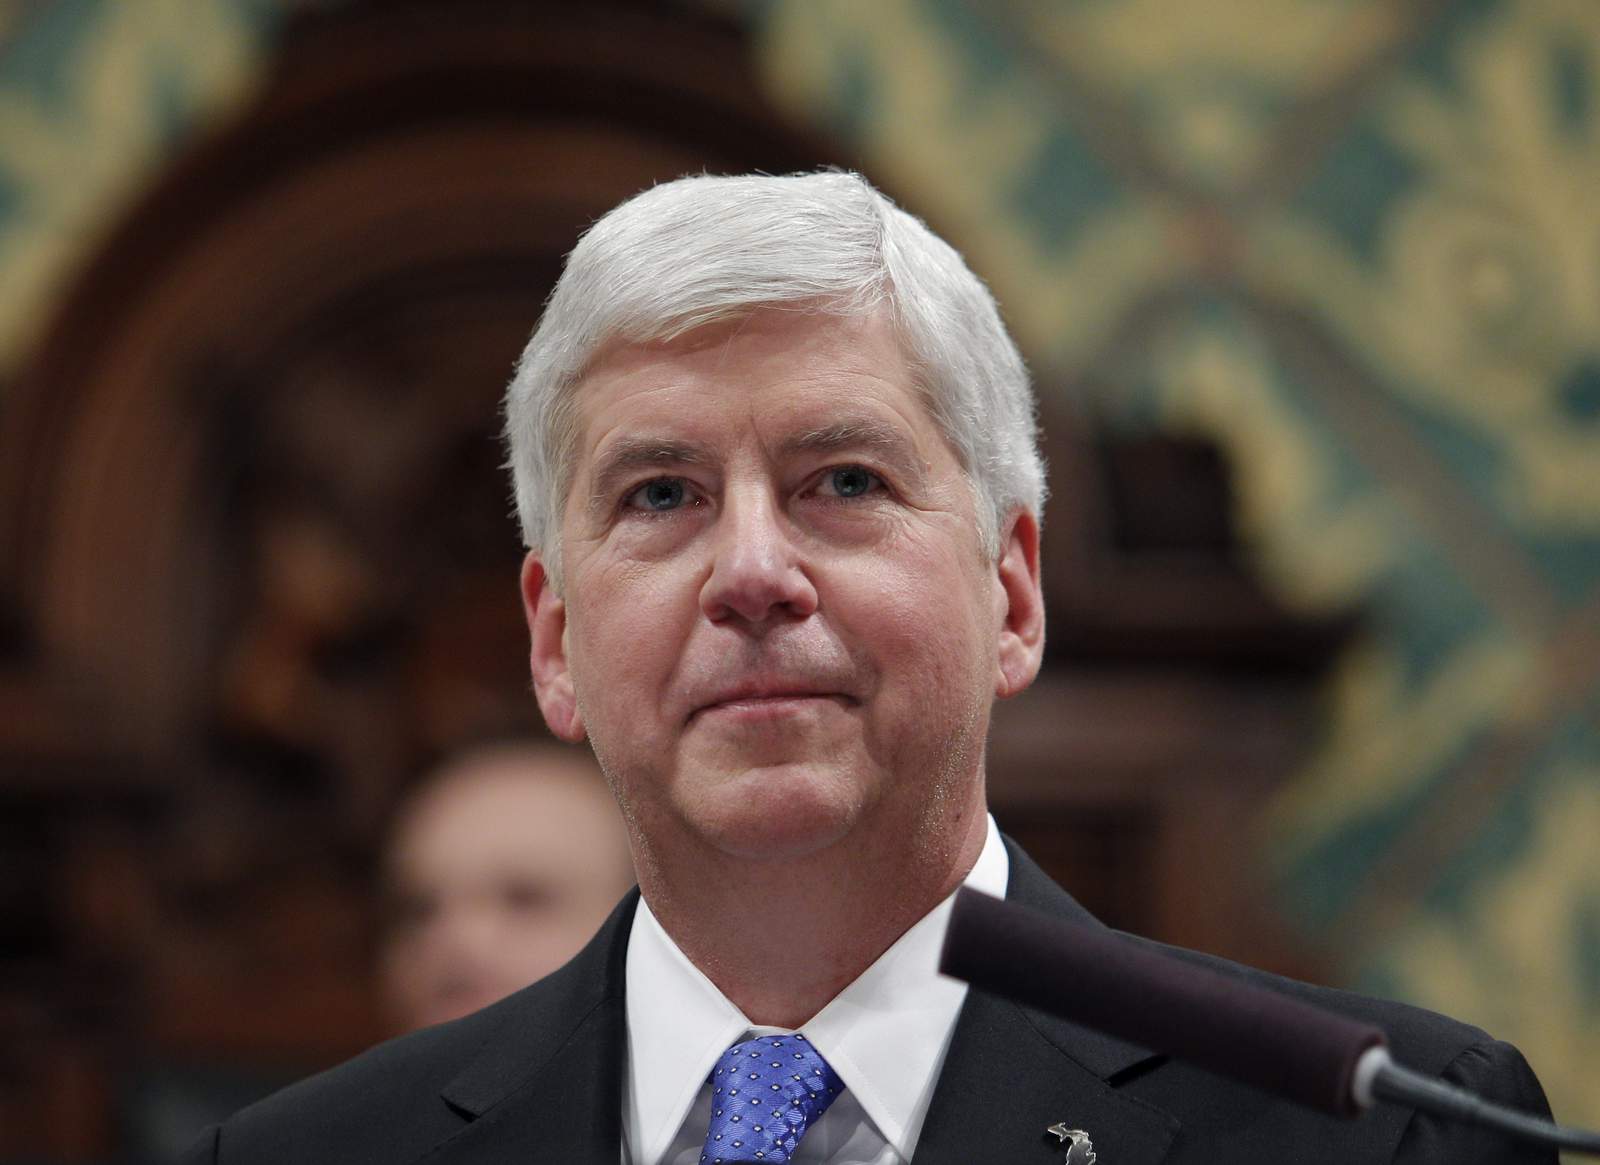 Michigan plans to charge ex-Gov. Snyder in Flint water probe